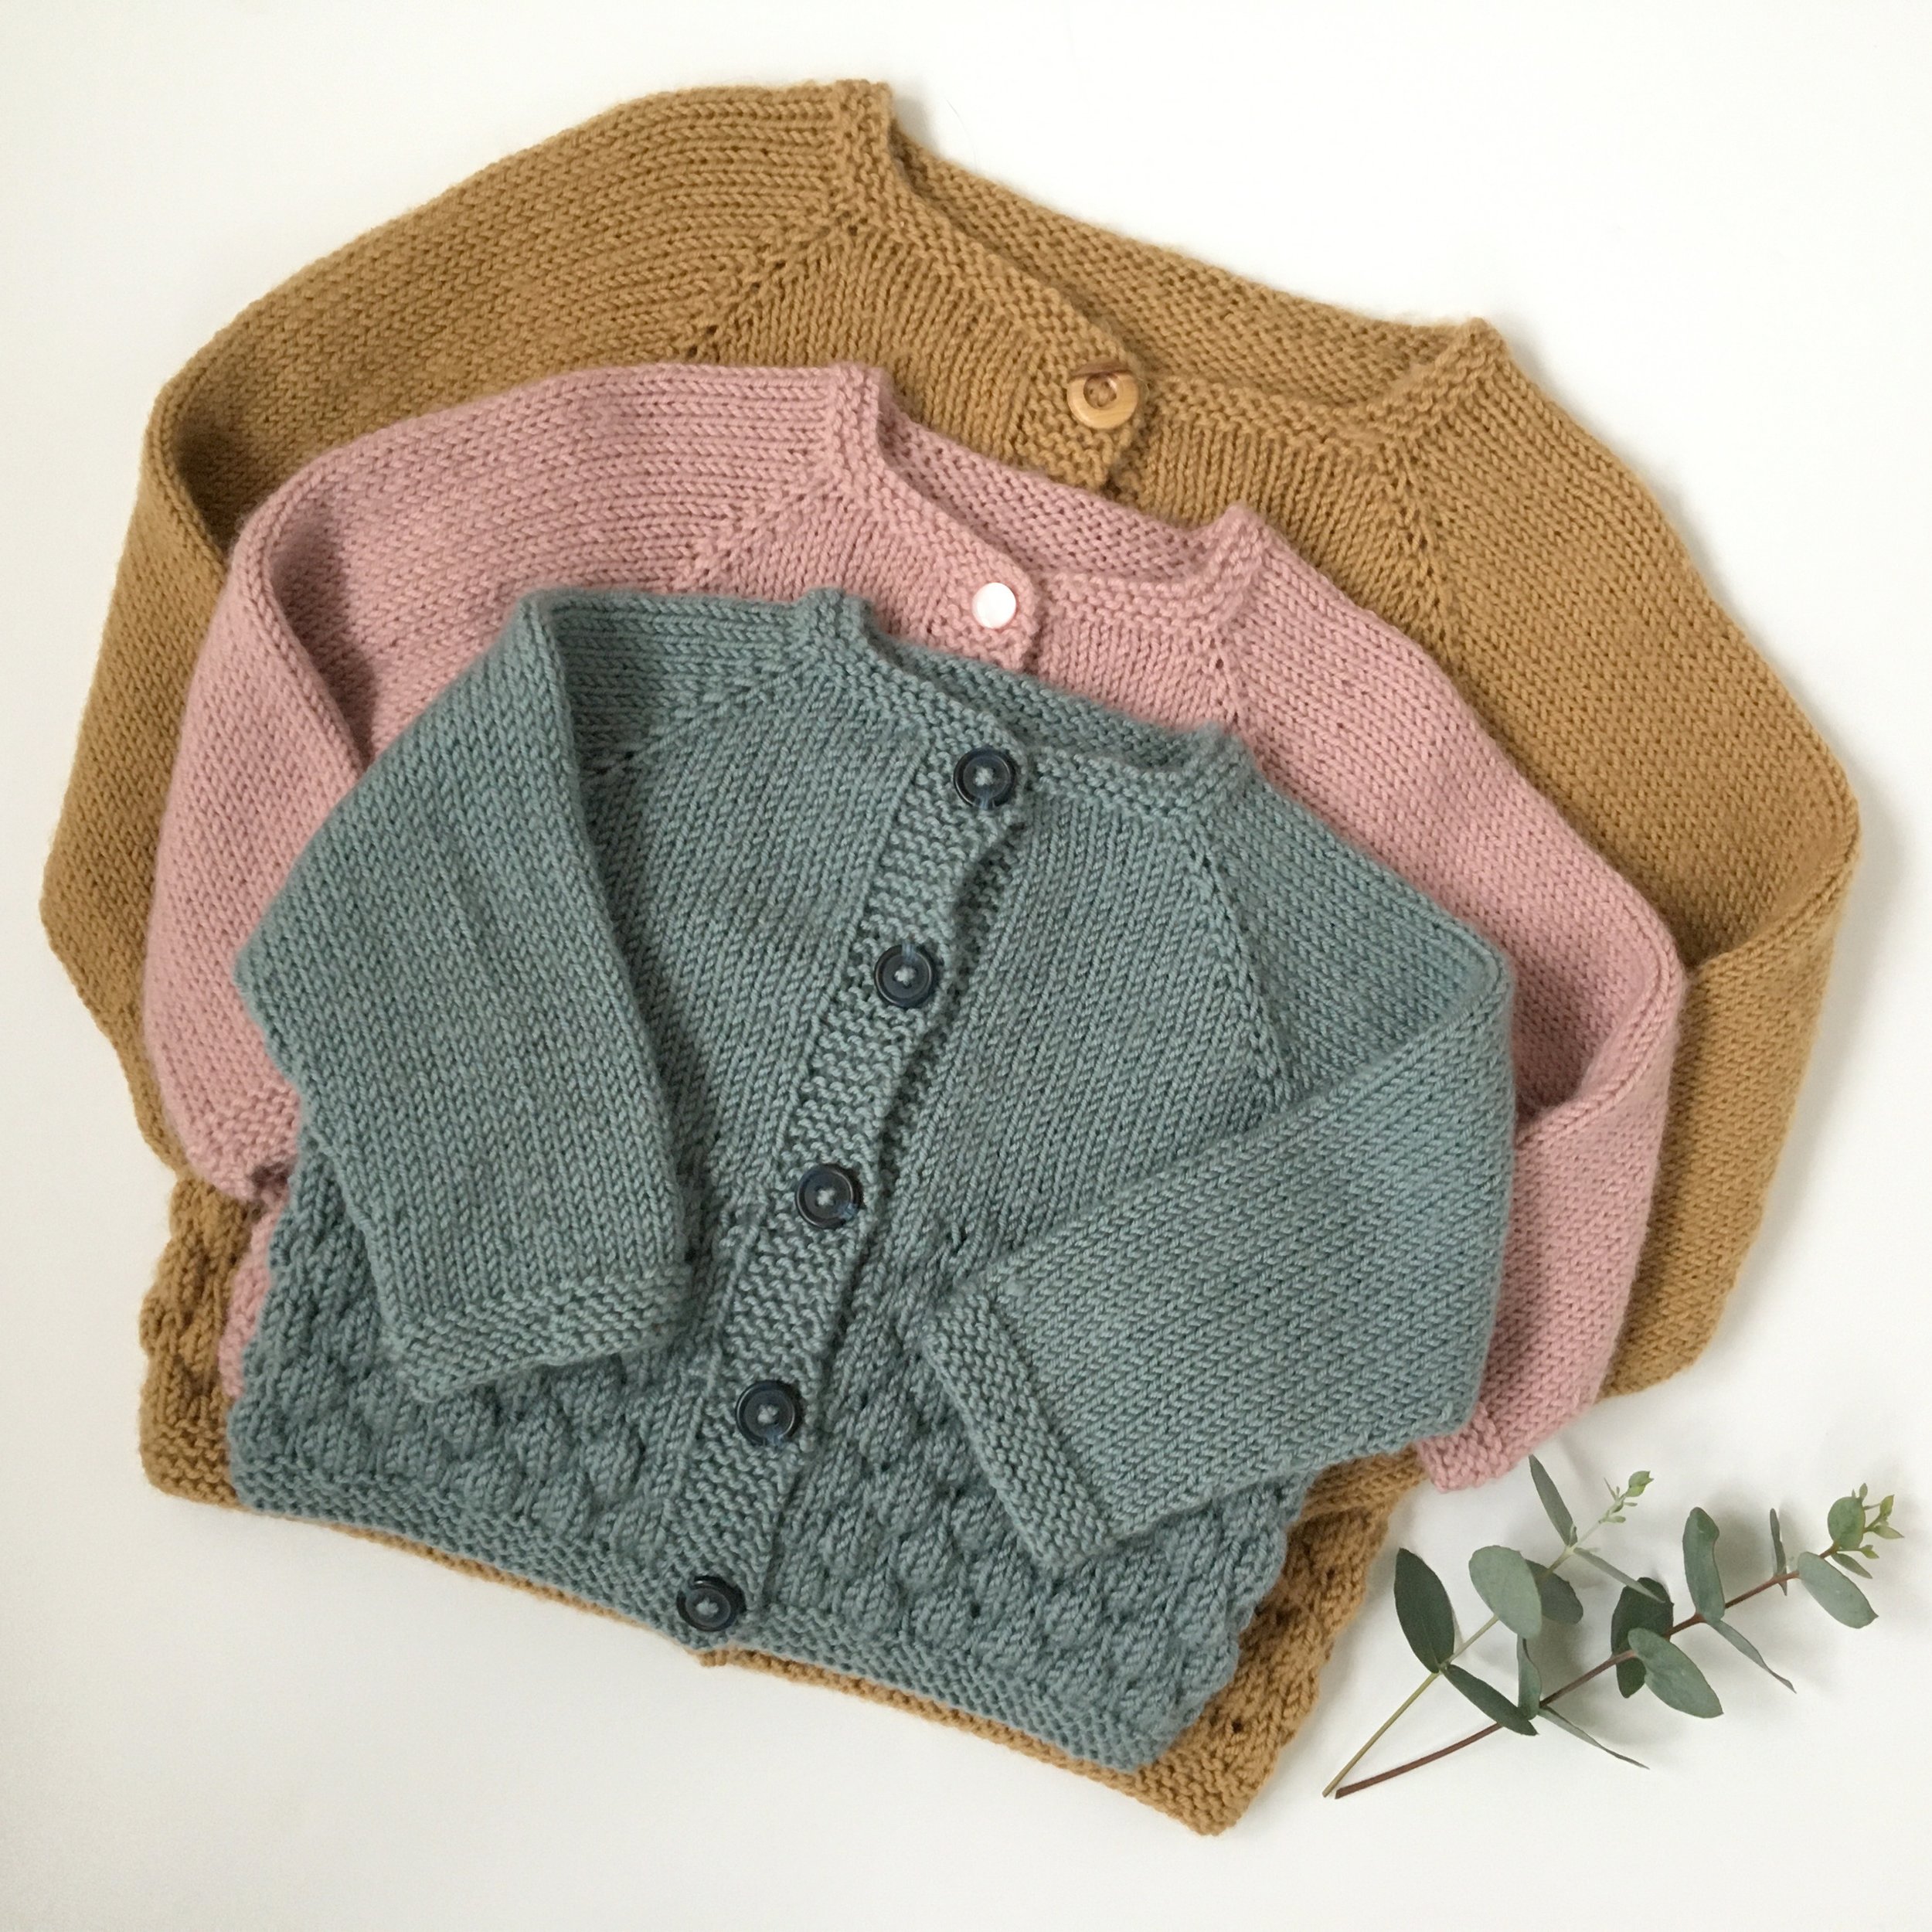 Top down baby cardigan knitting pattern — LoveFibres